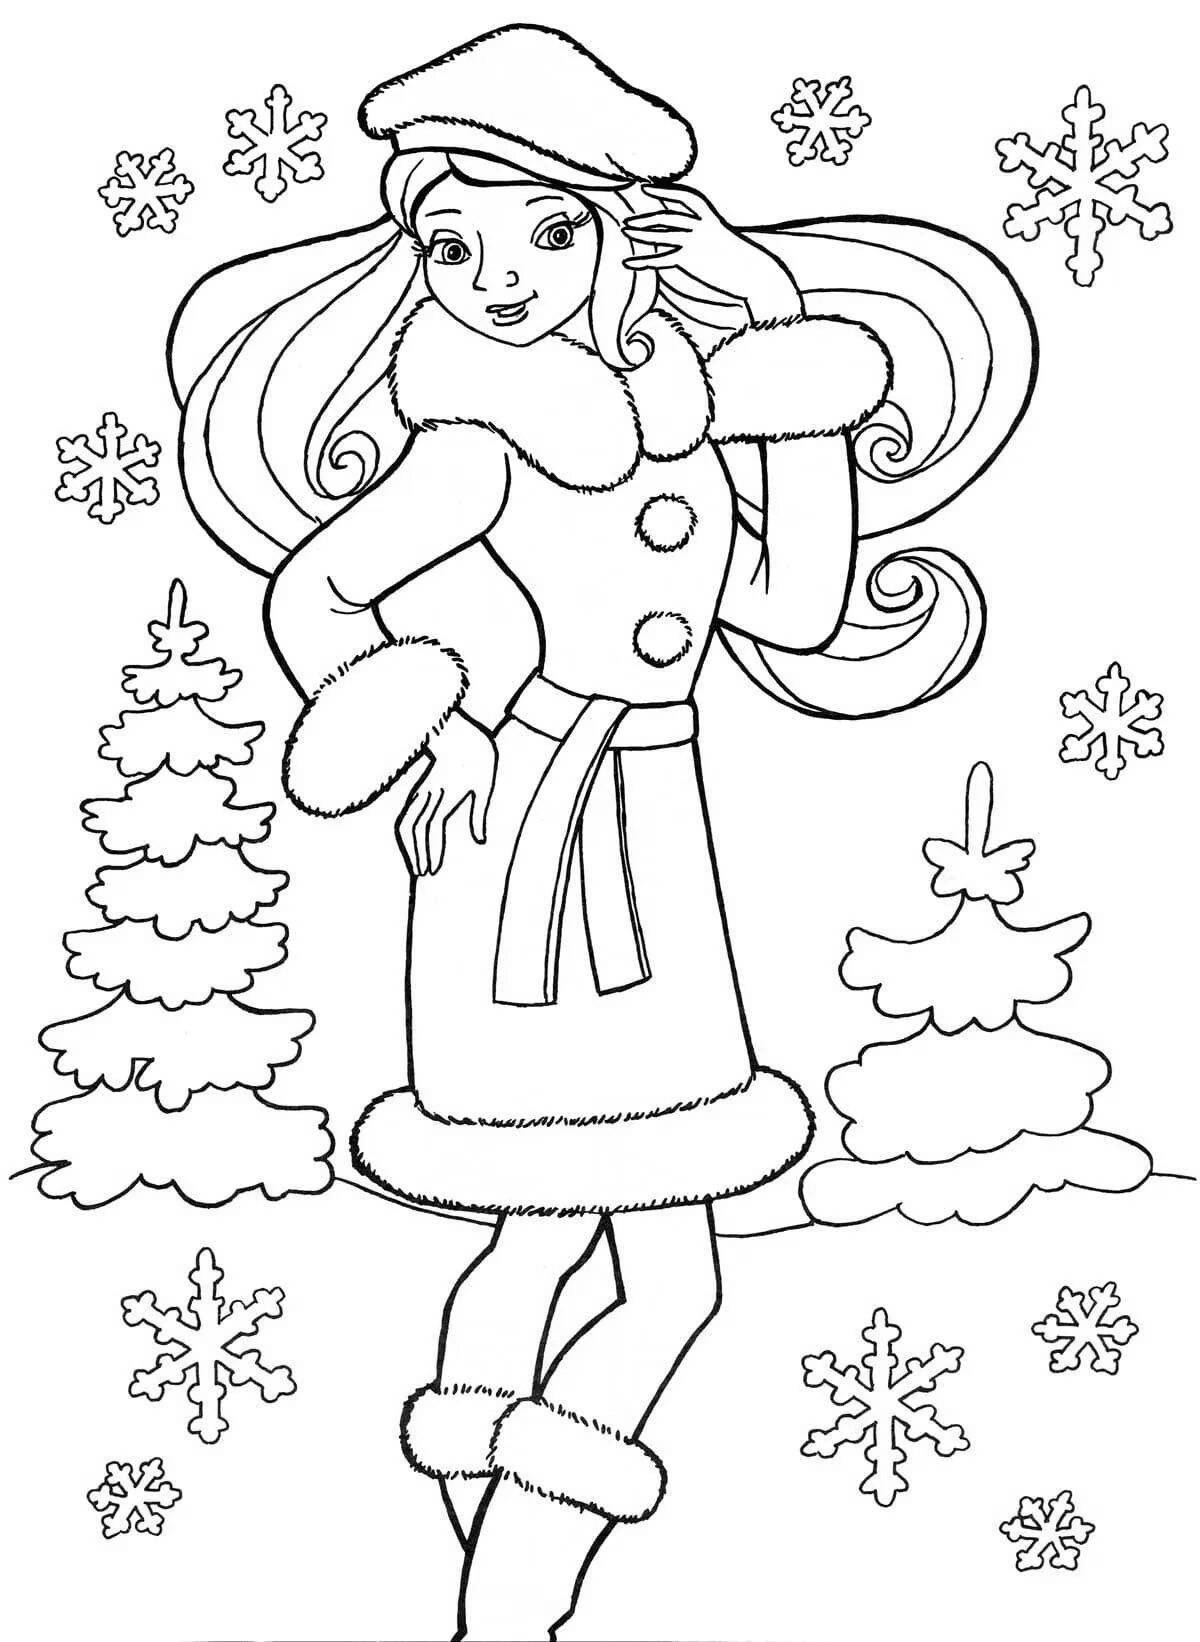 A fascinating Christmas coloring book for girls 10 years old